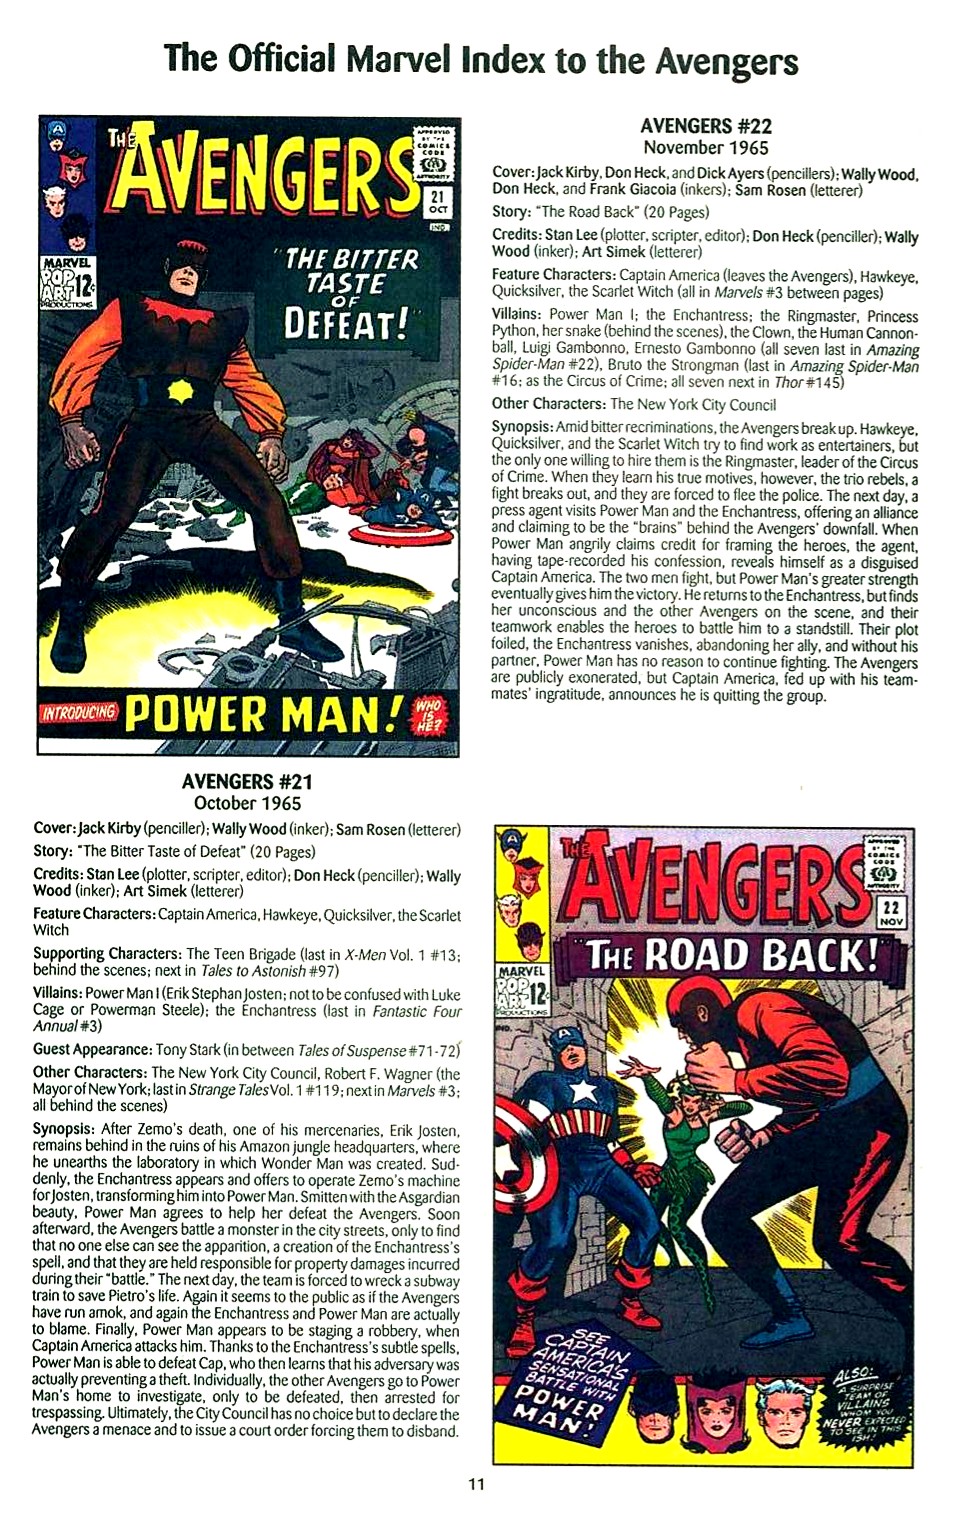 Read online The Official Marvel Index to the Avengers comic -  Issue #1 - 13